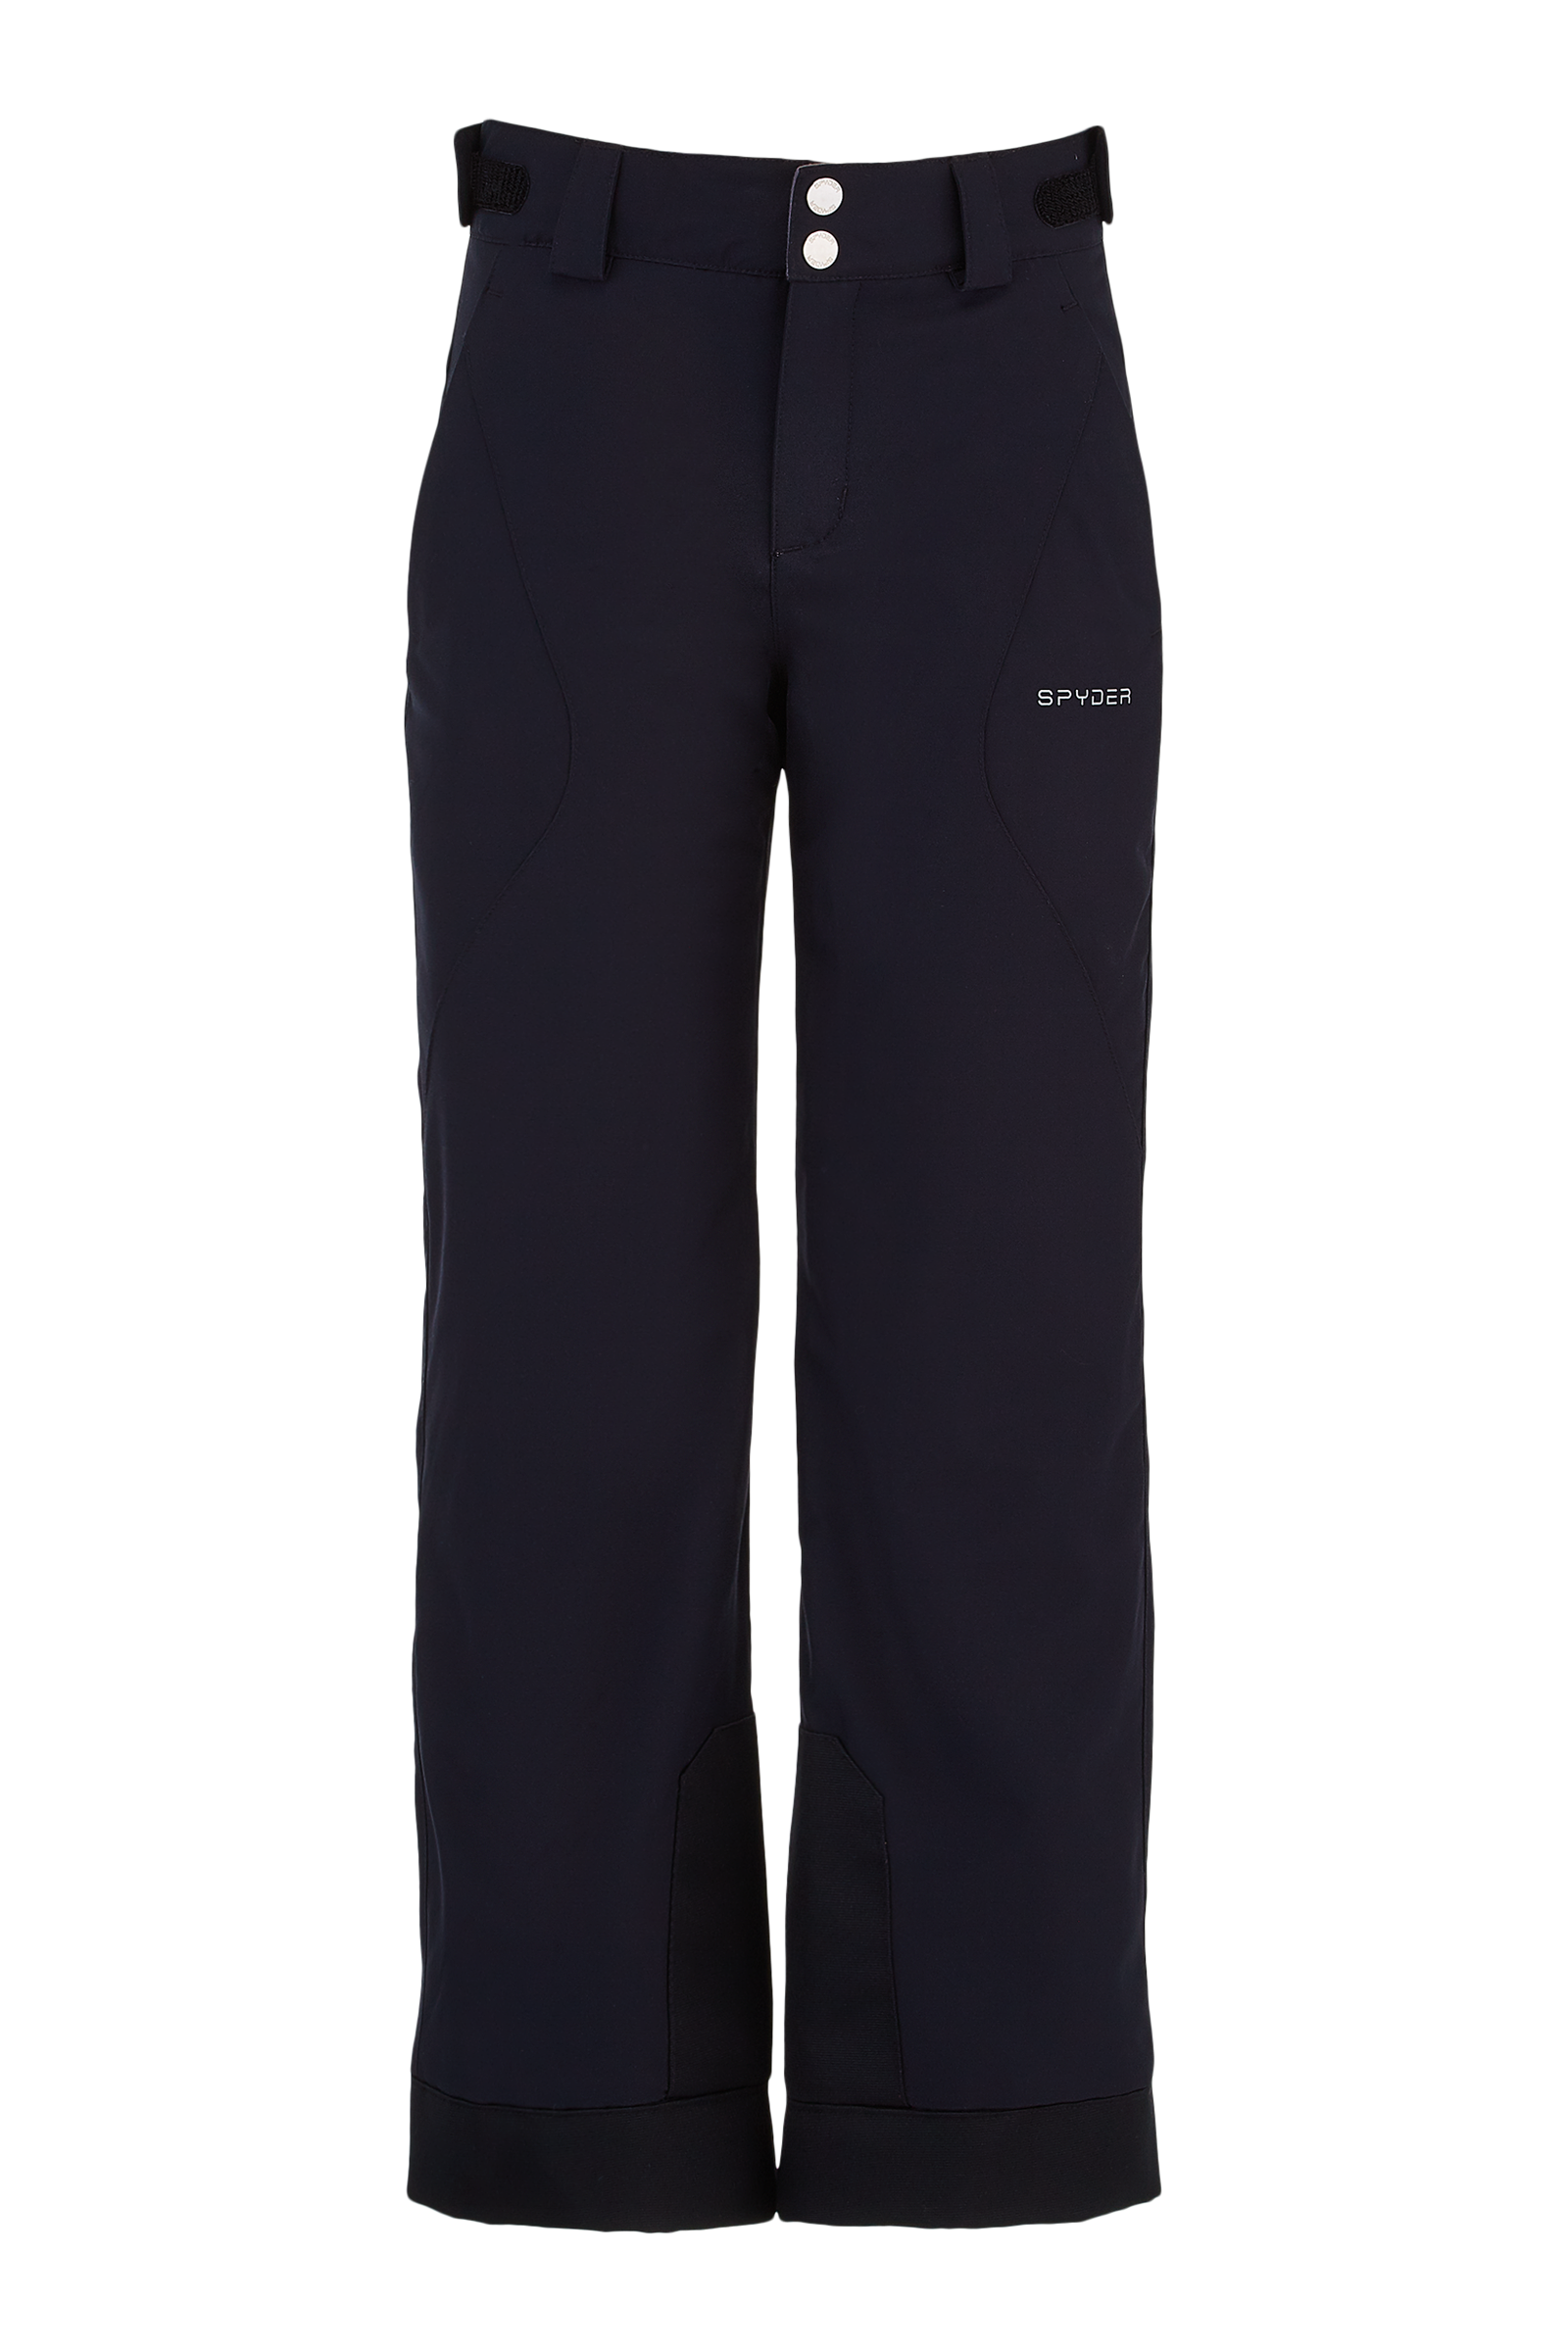 Spyder Girl's Olympia Pant - Winter 2021/2022 | Equipe Sport